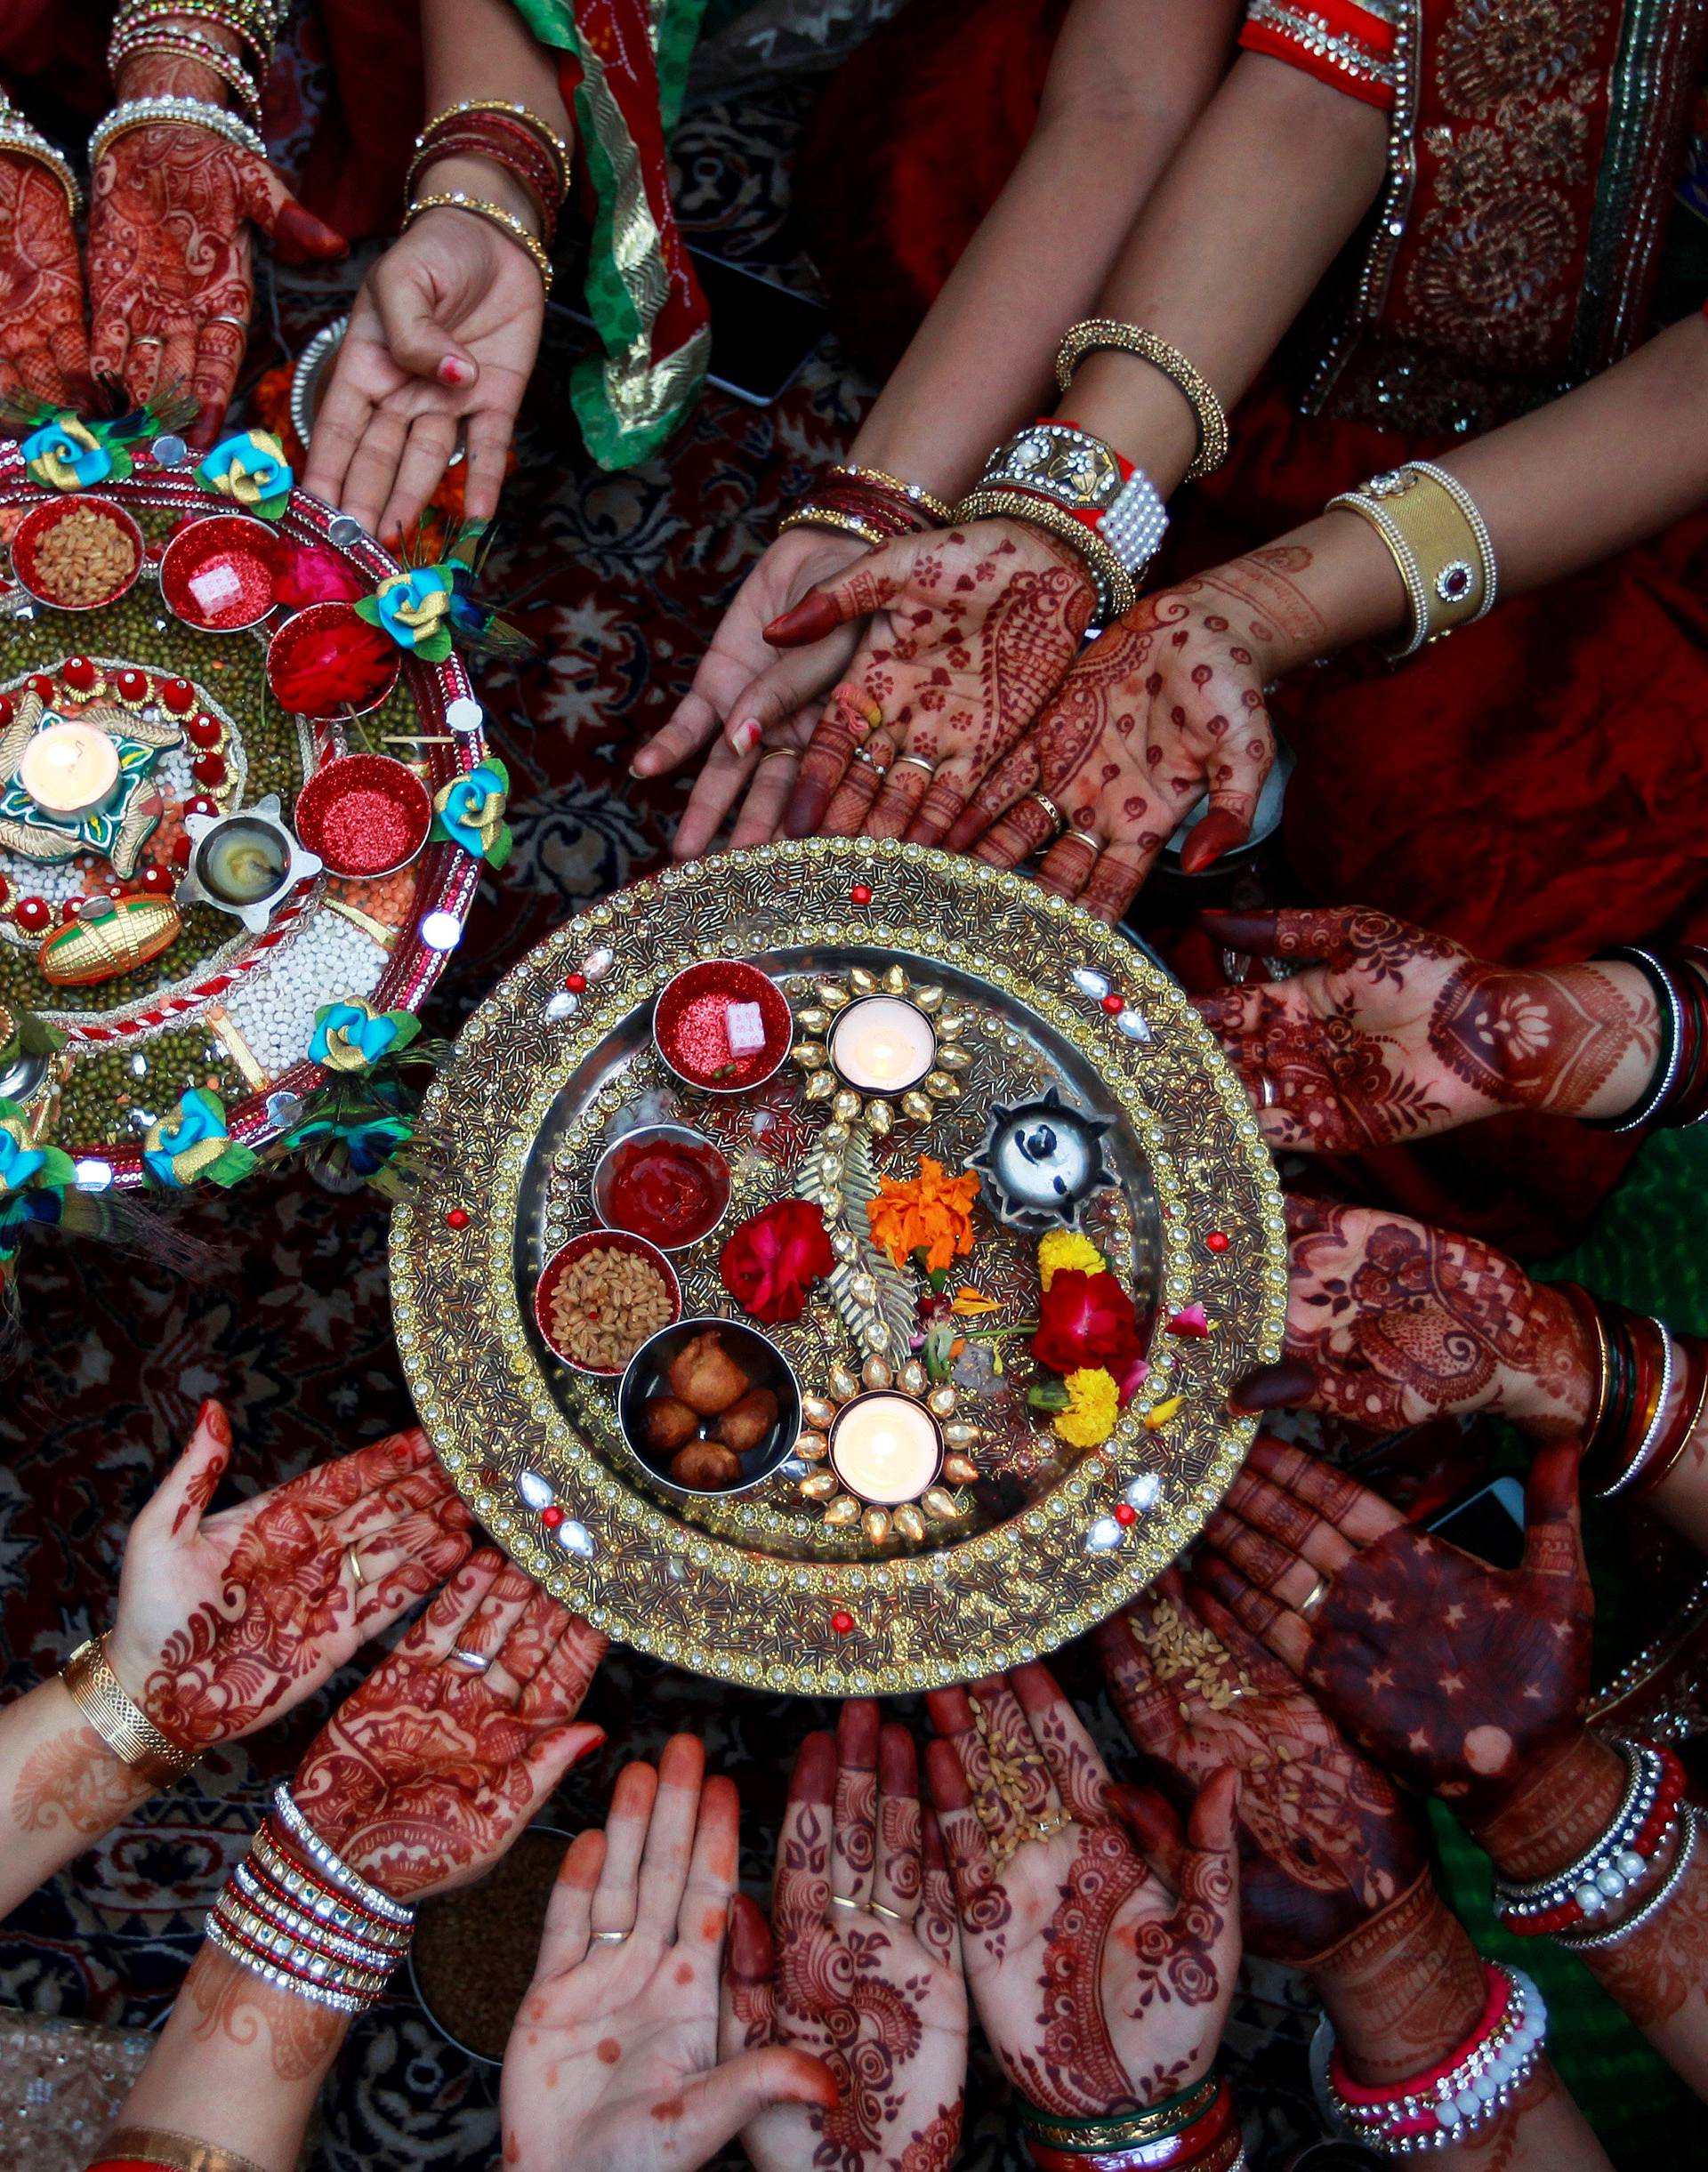 Married women pose for pictures as they perform rituals for the well being of their husbands during the Hindu festival of Karva Chauth in Ahmedabad